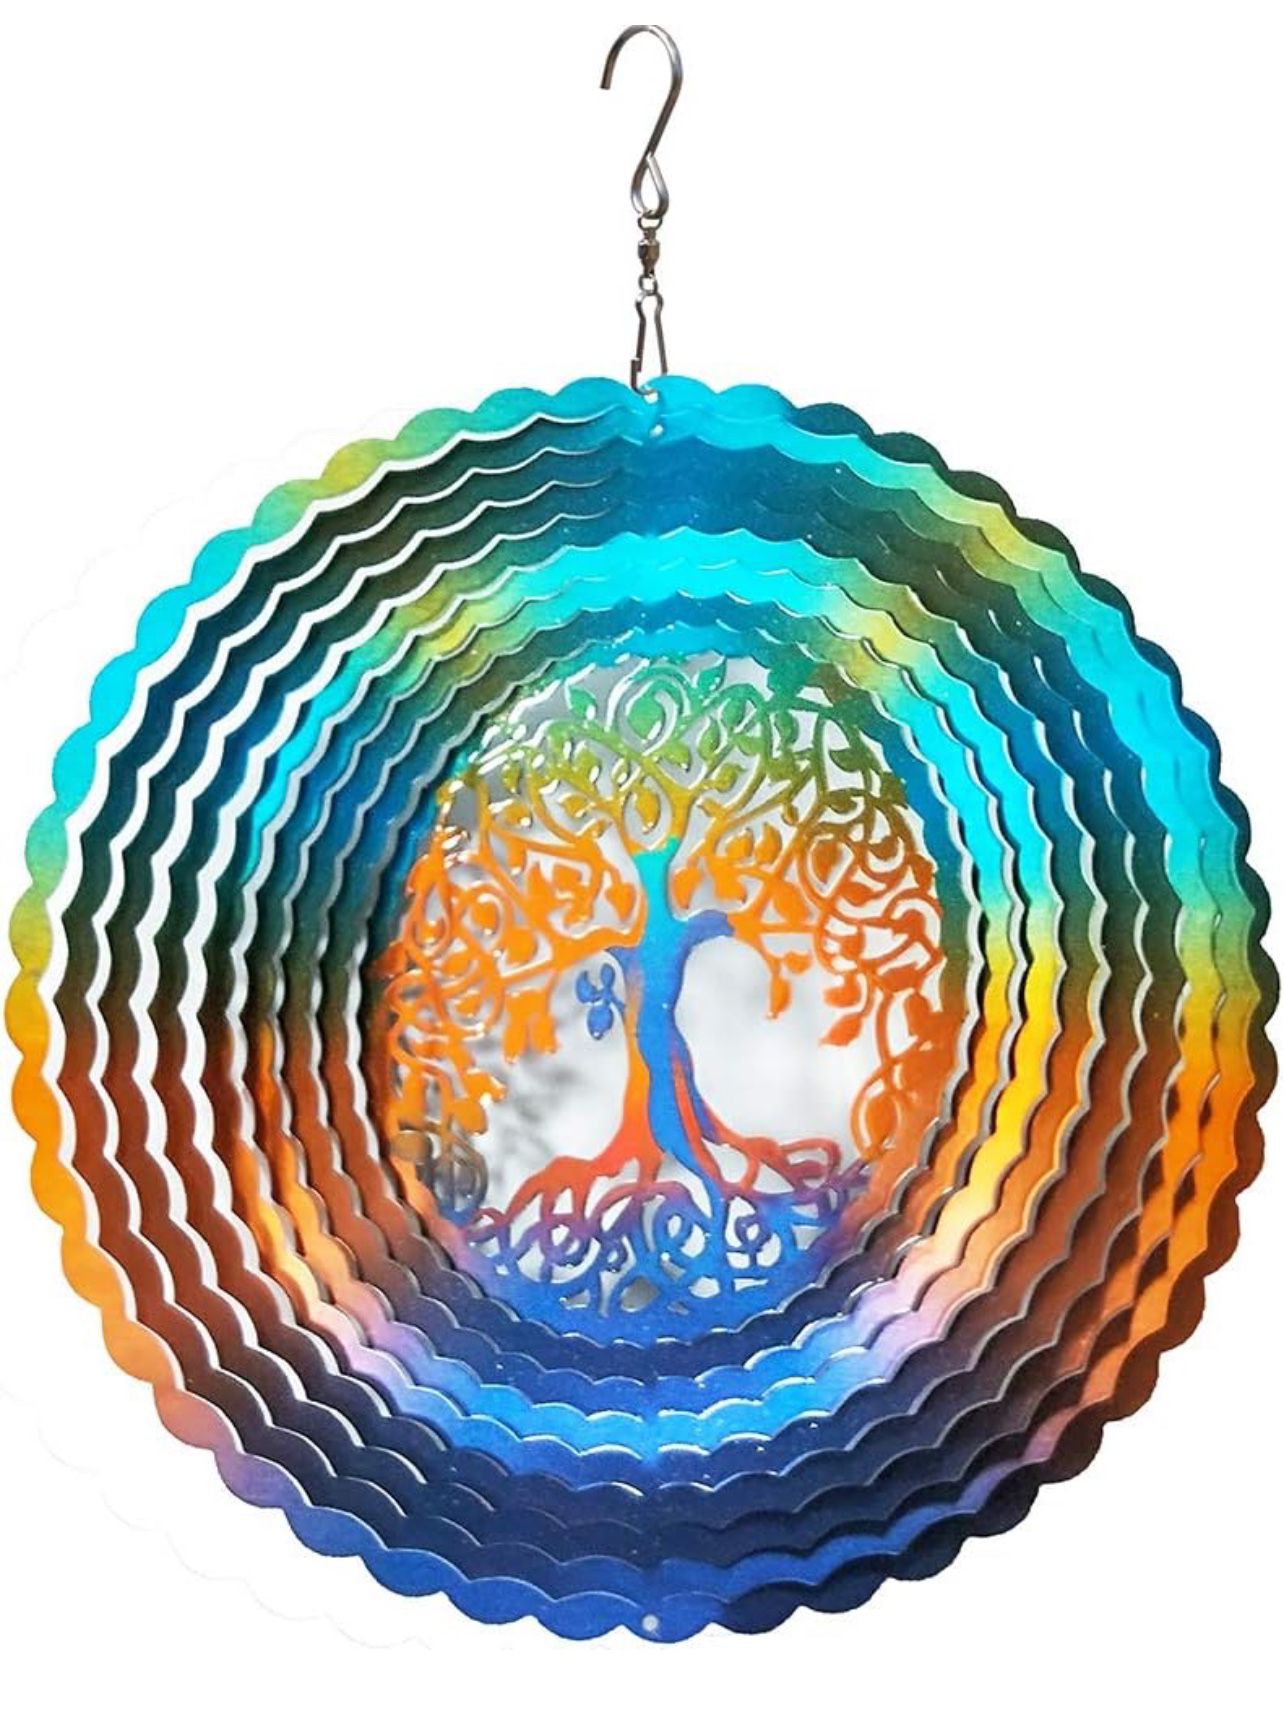 FONMY Stainless Steel Wind Spinner Worth Gifts Indoor Outdoor Garden Decoration Crafts Ornaments 12Inch Multi Color Life Tree Wind Spinners